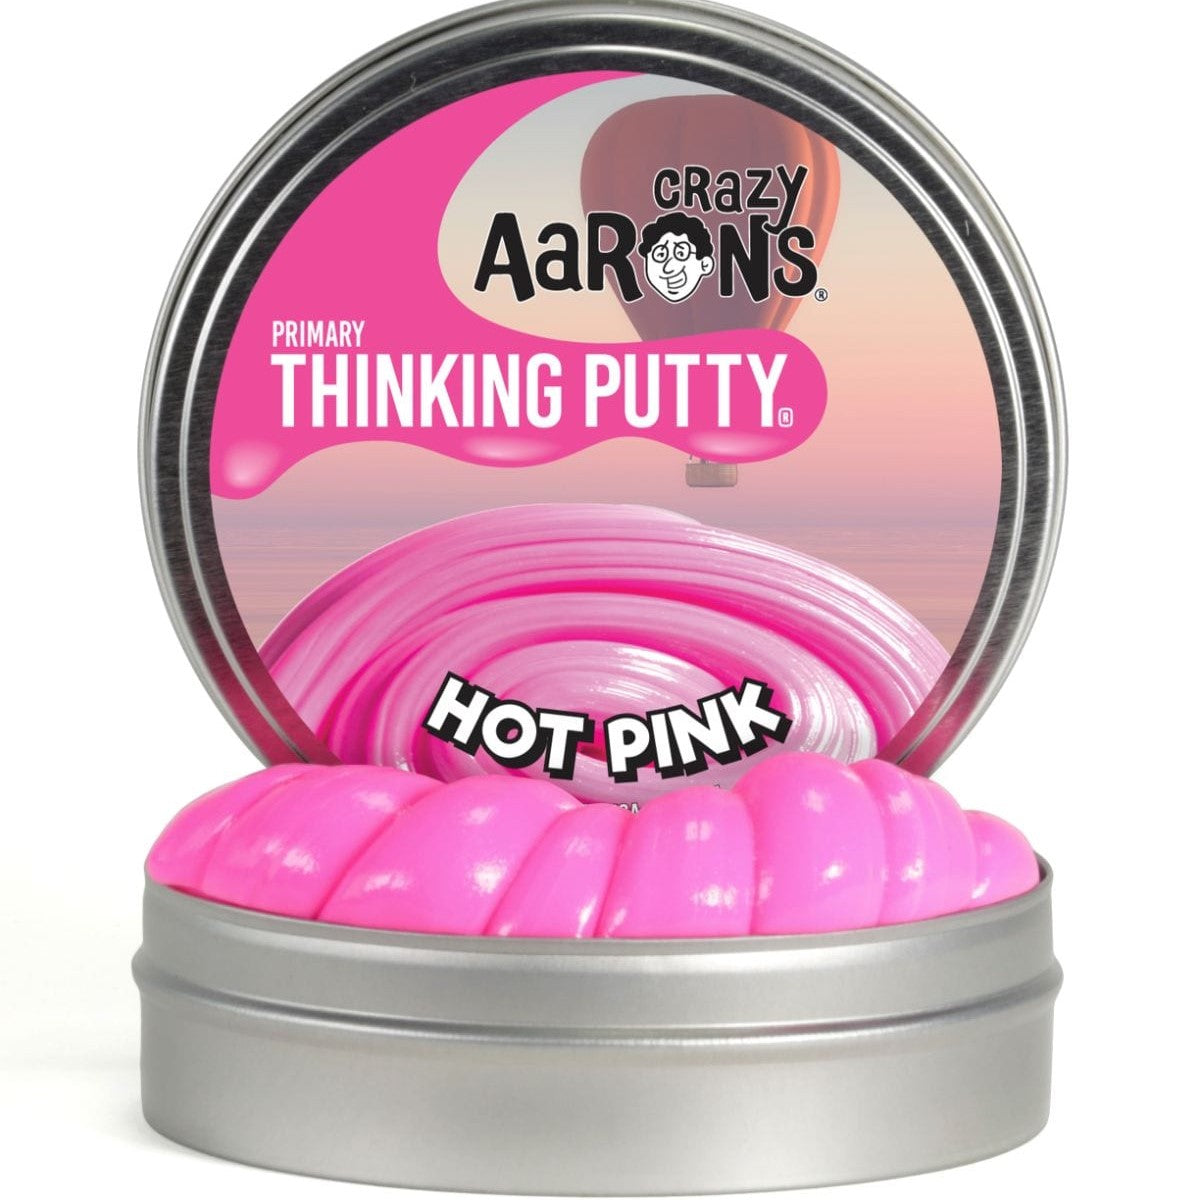 Crazy Aaron's Trendsetters Putty 10cm Tins